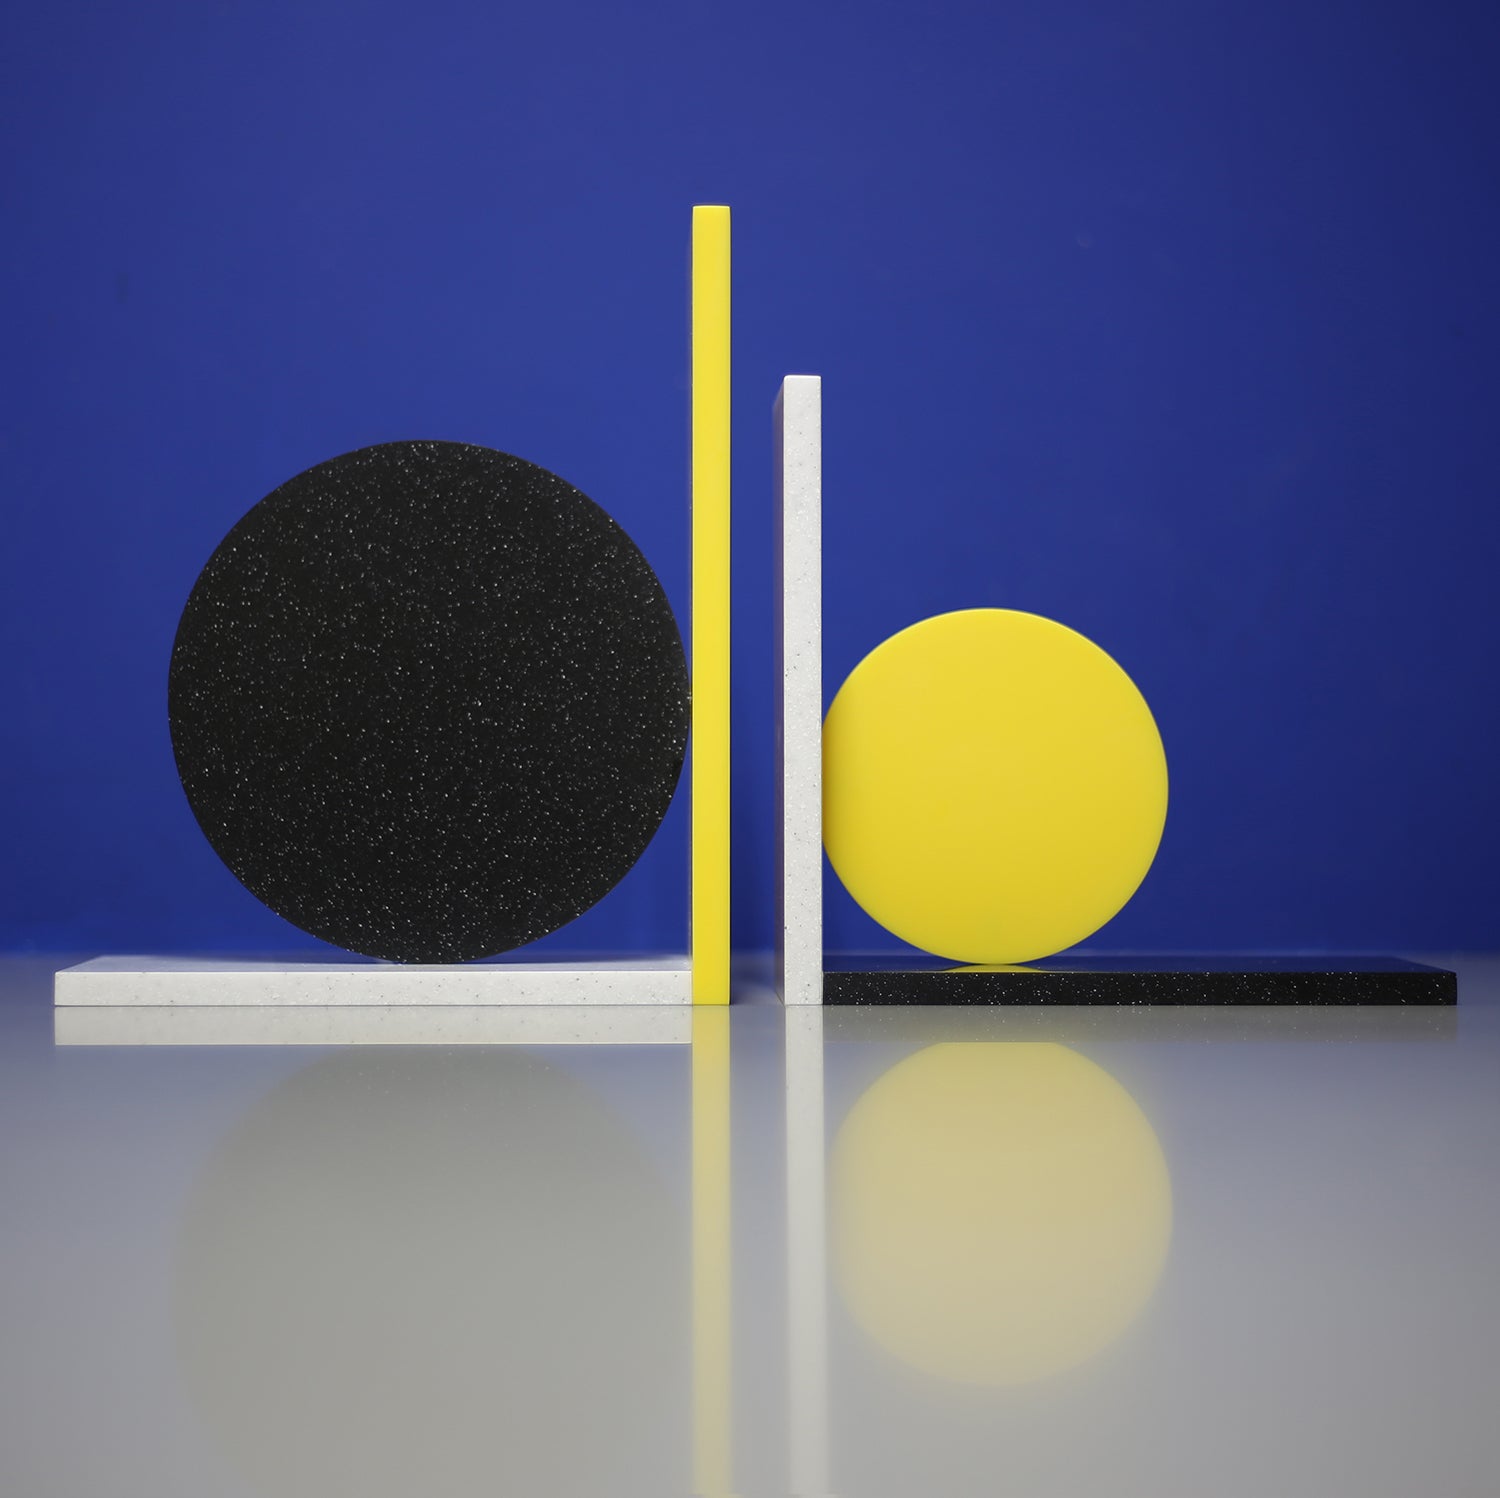 Corian Dot Bookends made to order. Asymmetrical design makes each end different. Yellow corian, black speckled corian, light grey speckled corian.  A colourful addition to any shelf!